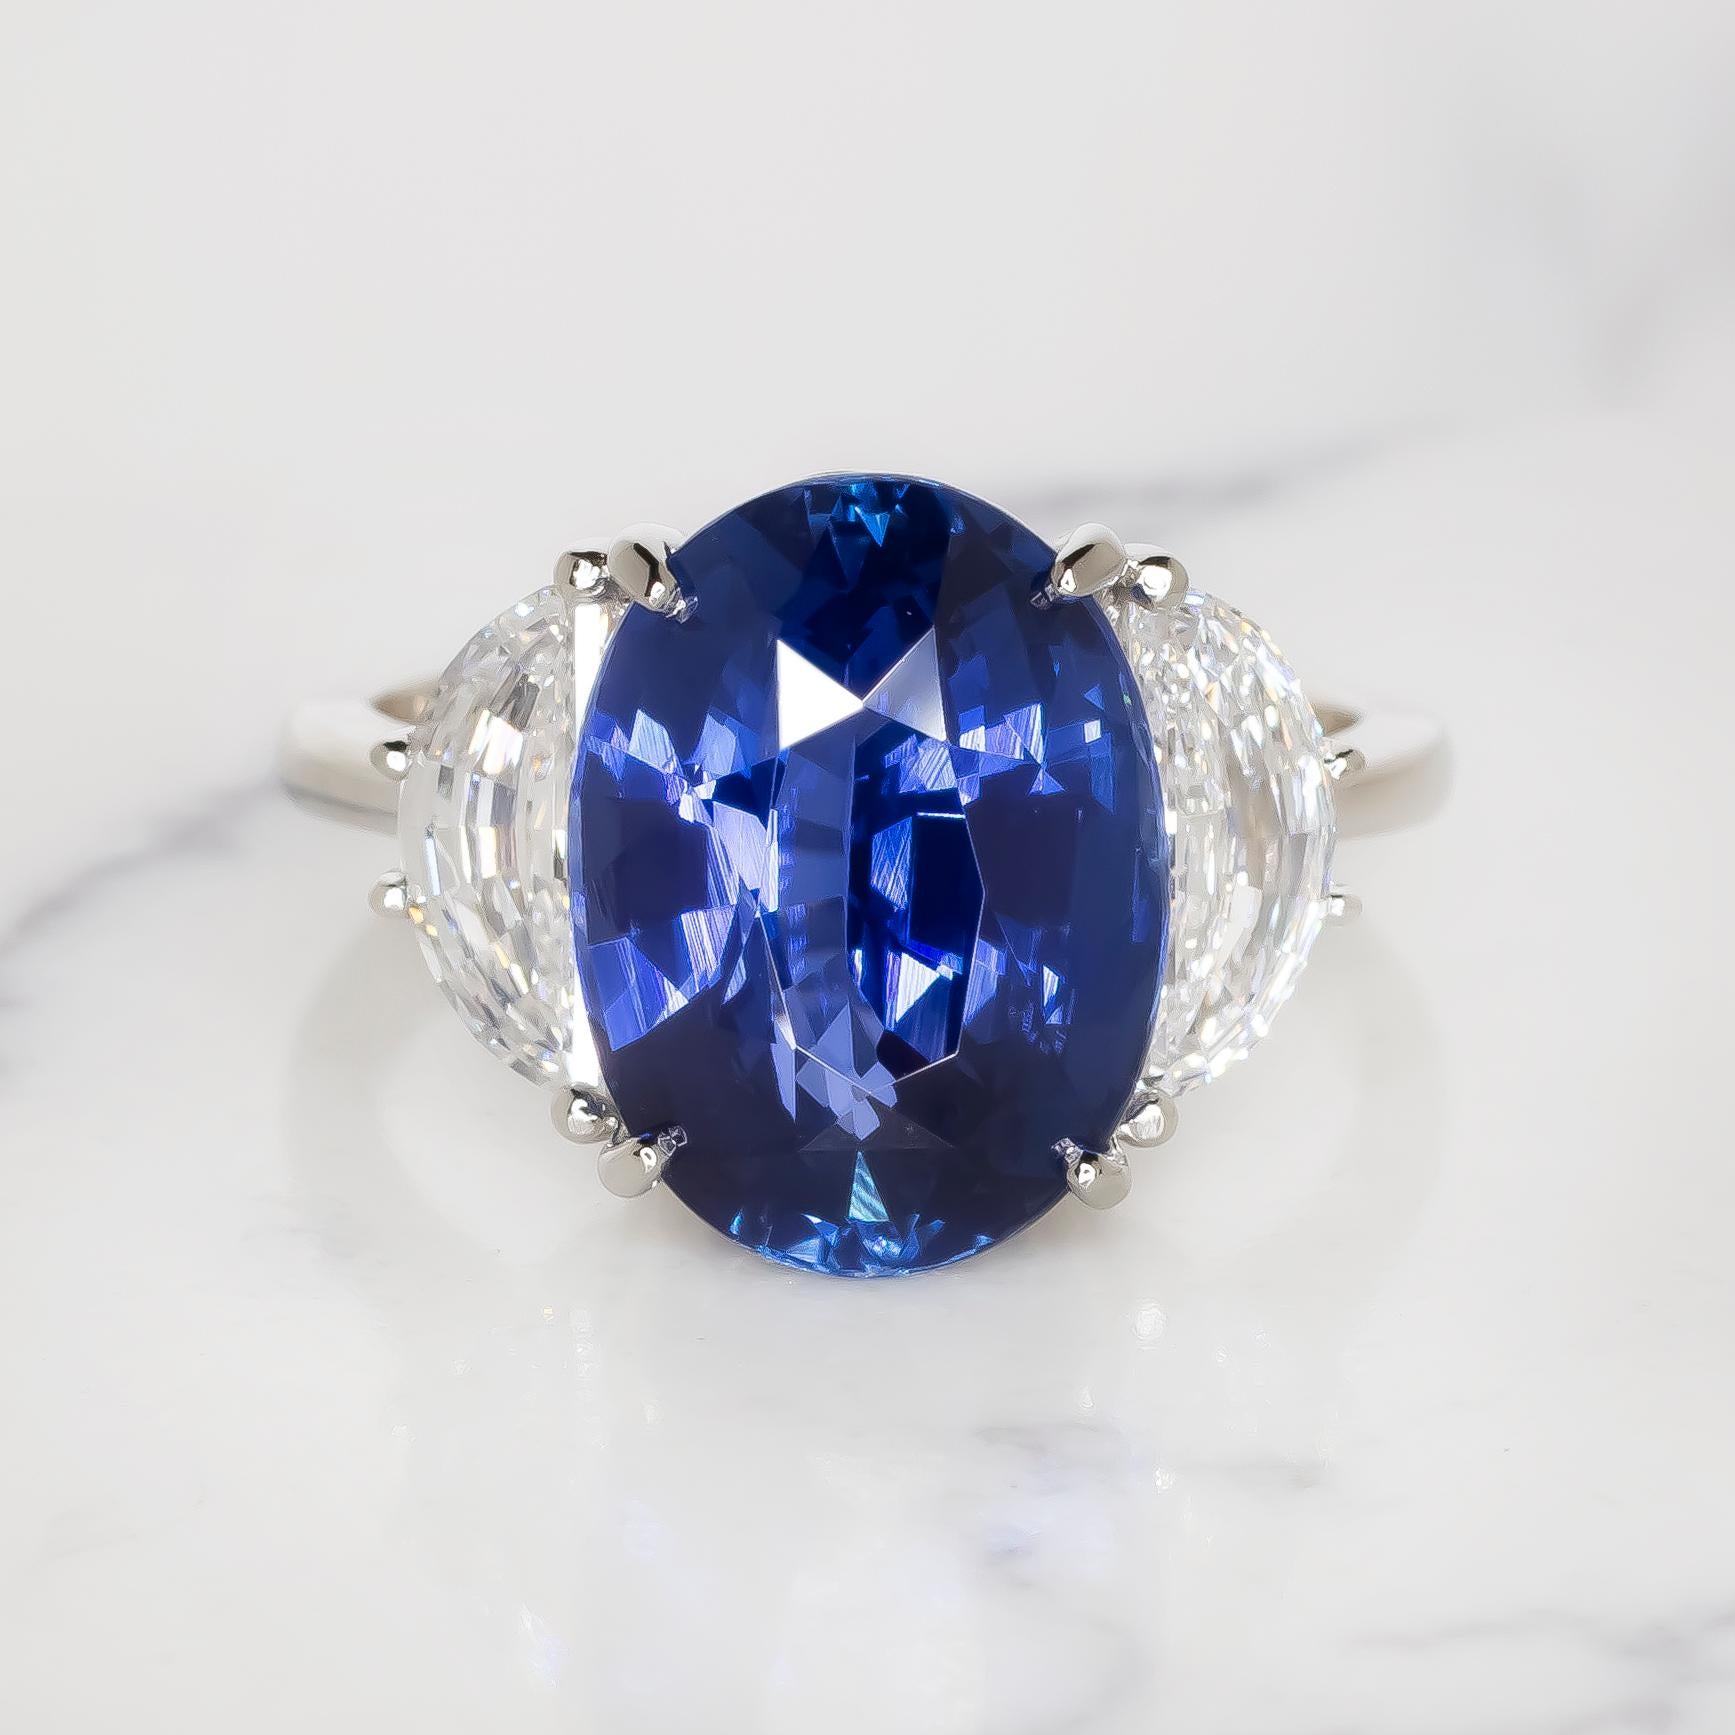 Prepare to be swept away by the extraordinary beauty of our GIA Certified 7 Carat Oval Blue Sapphire Diamond Ring, sourced directly from the illustrious mines of Ceylon. This magnificent creation is more than just a ring—it's a symbol of rare